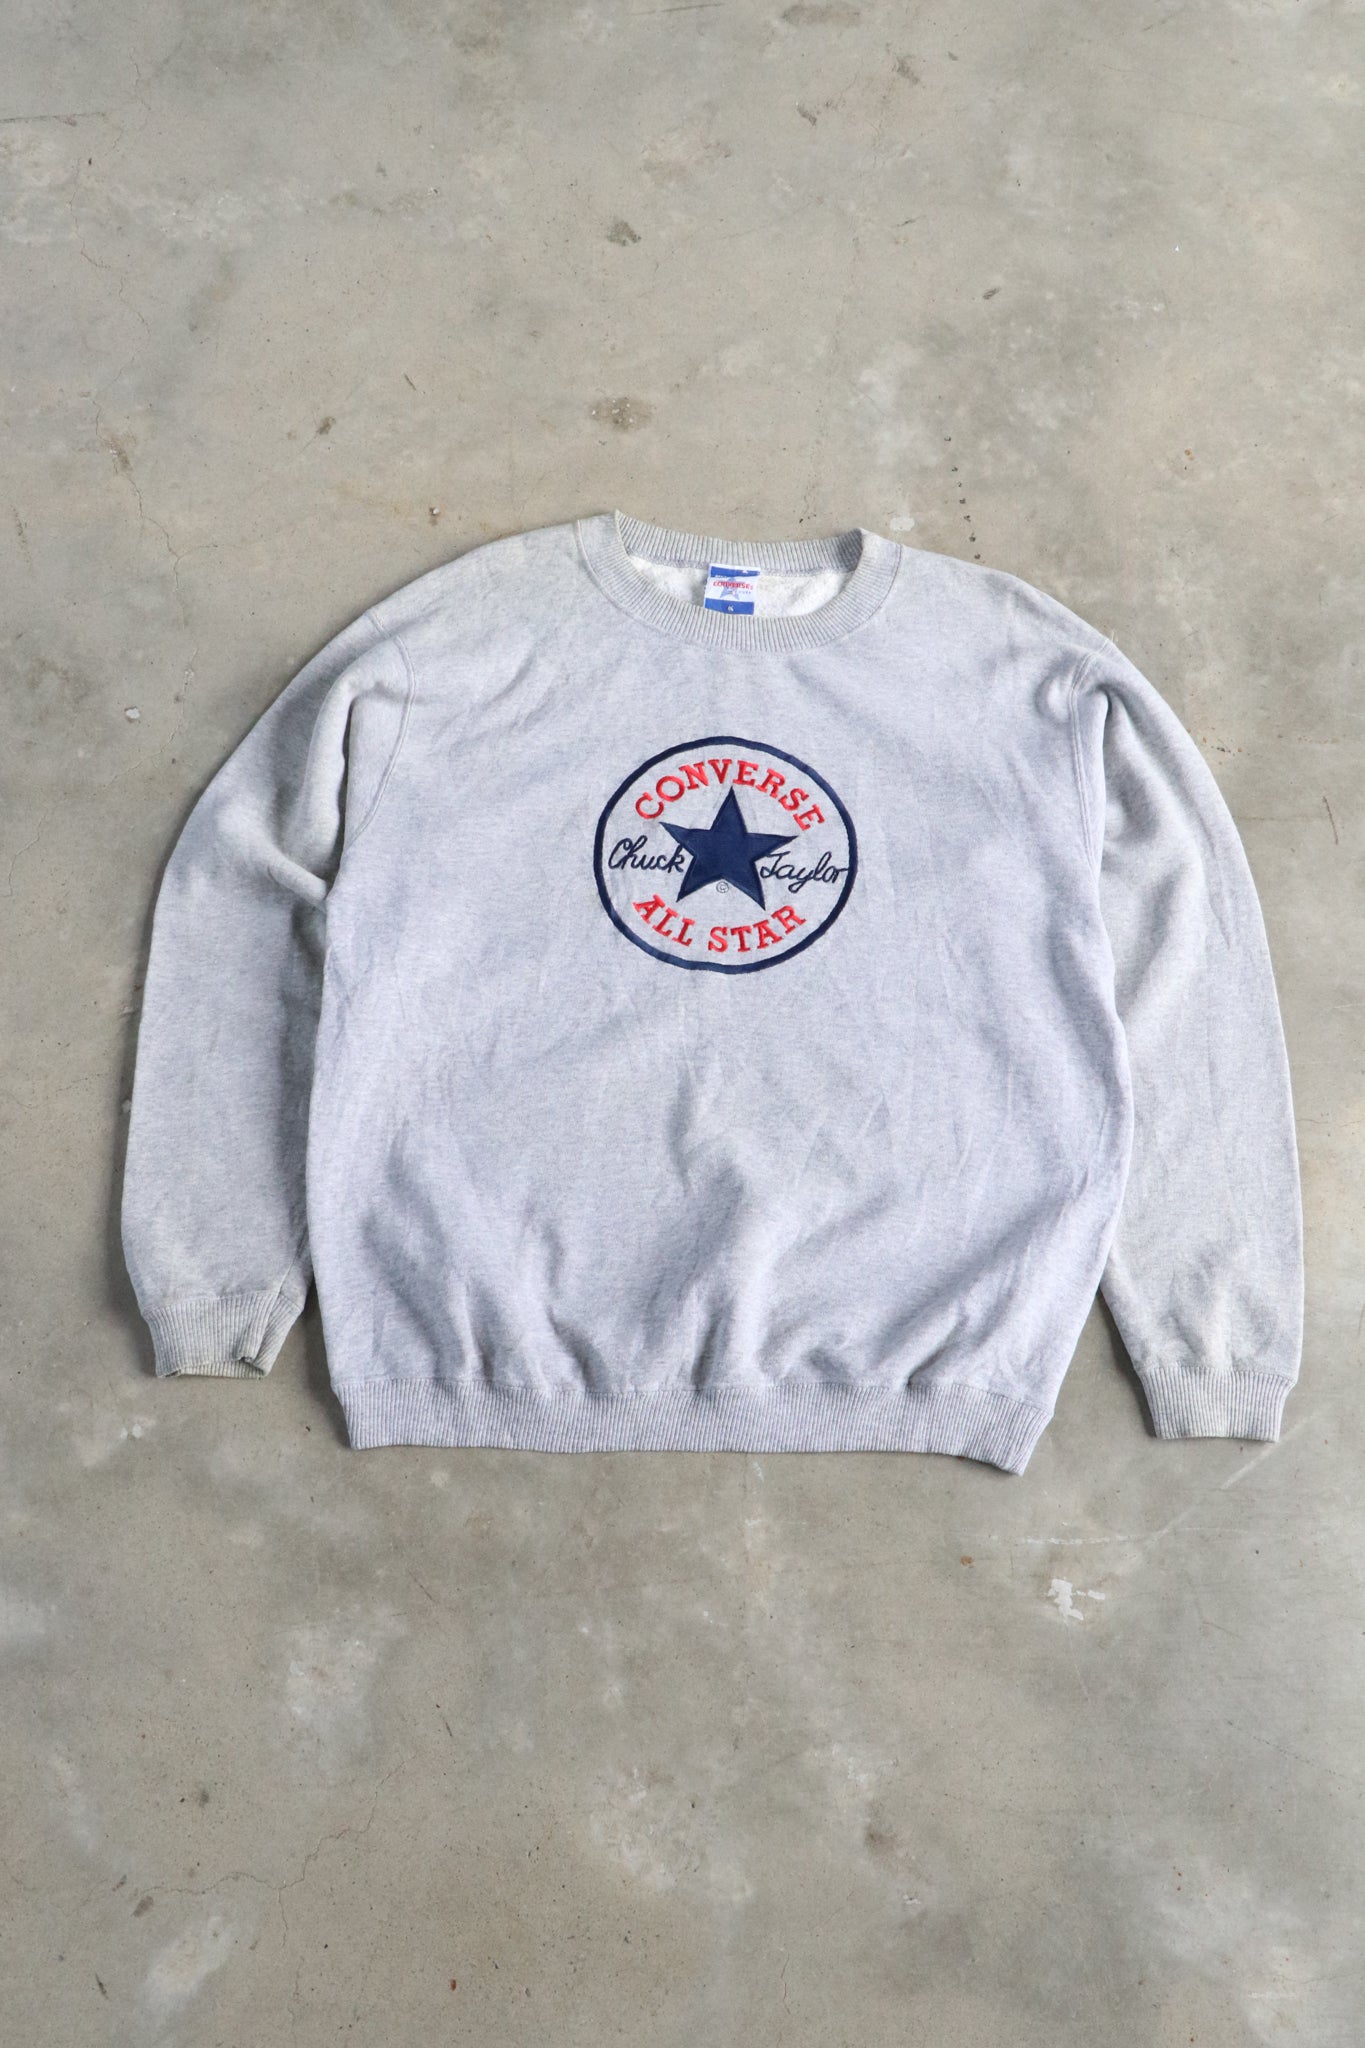 Vintage Converse All Star Embroided Sweater Large